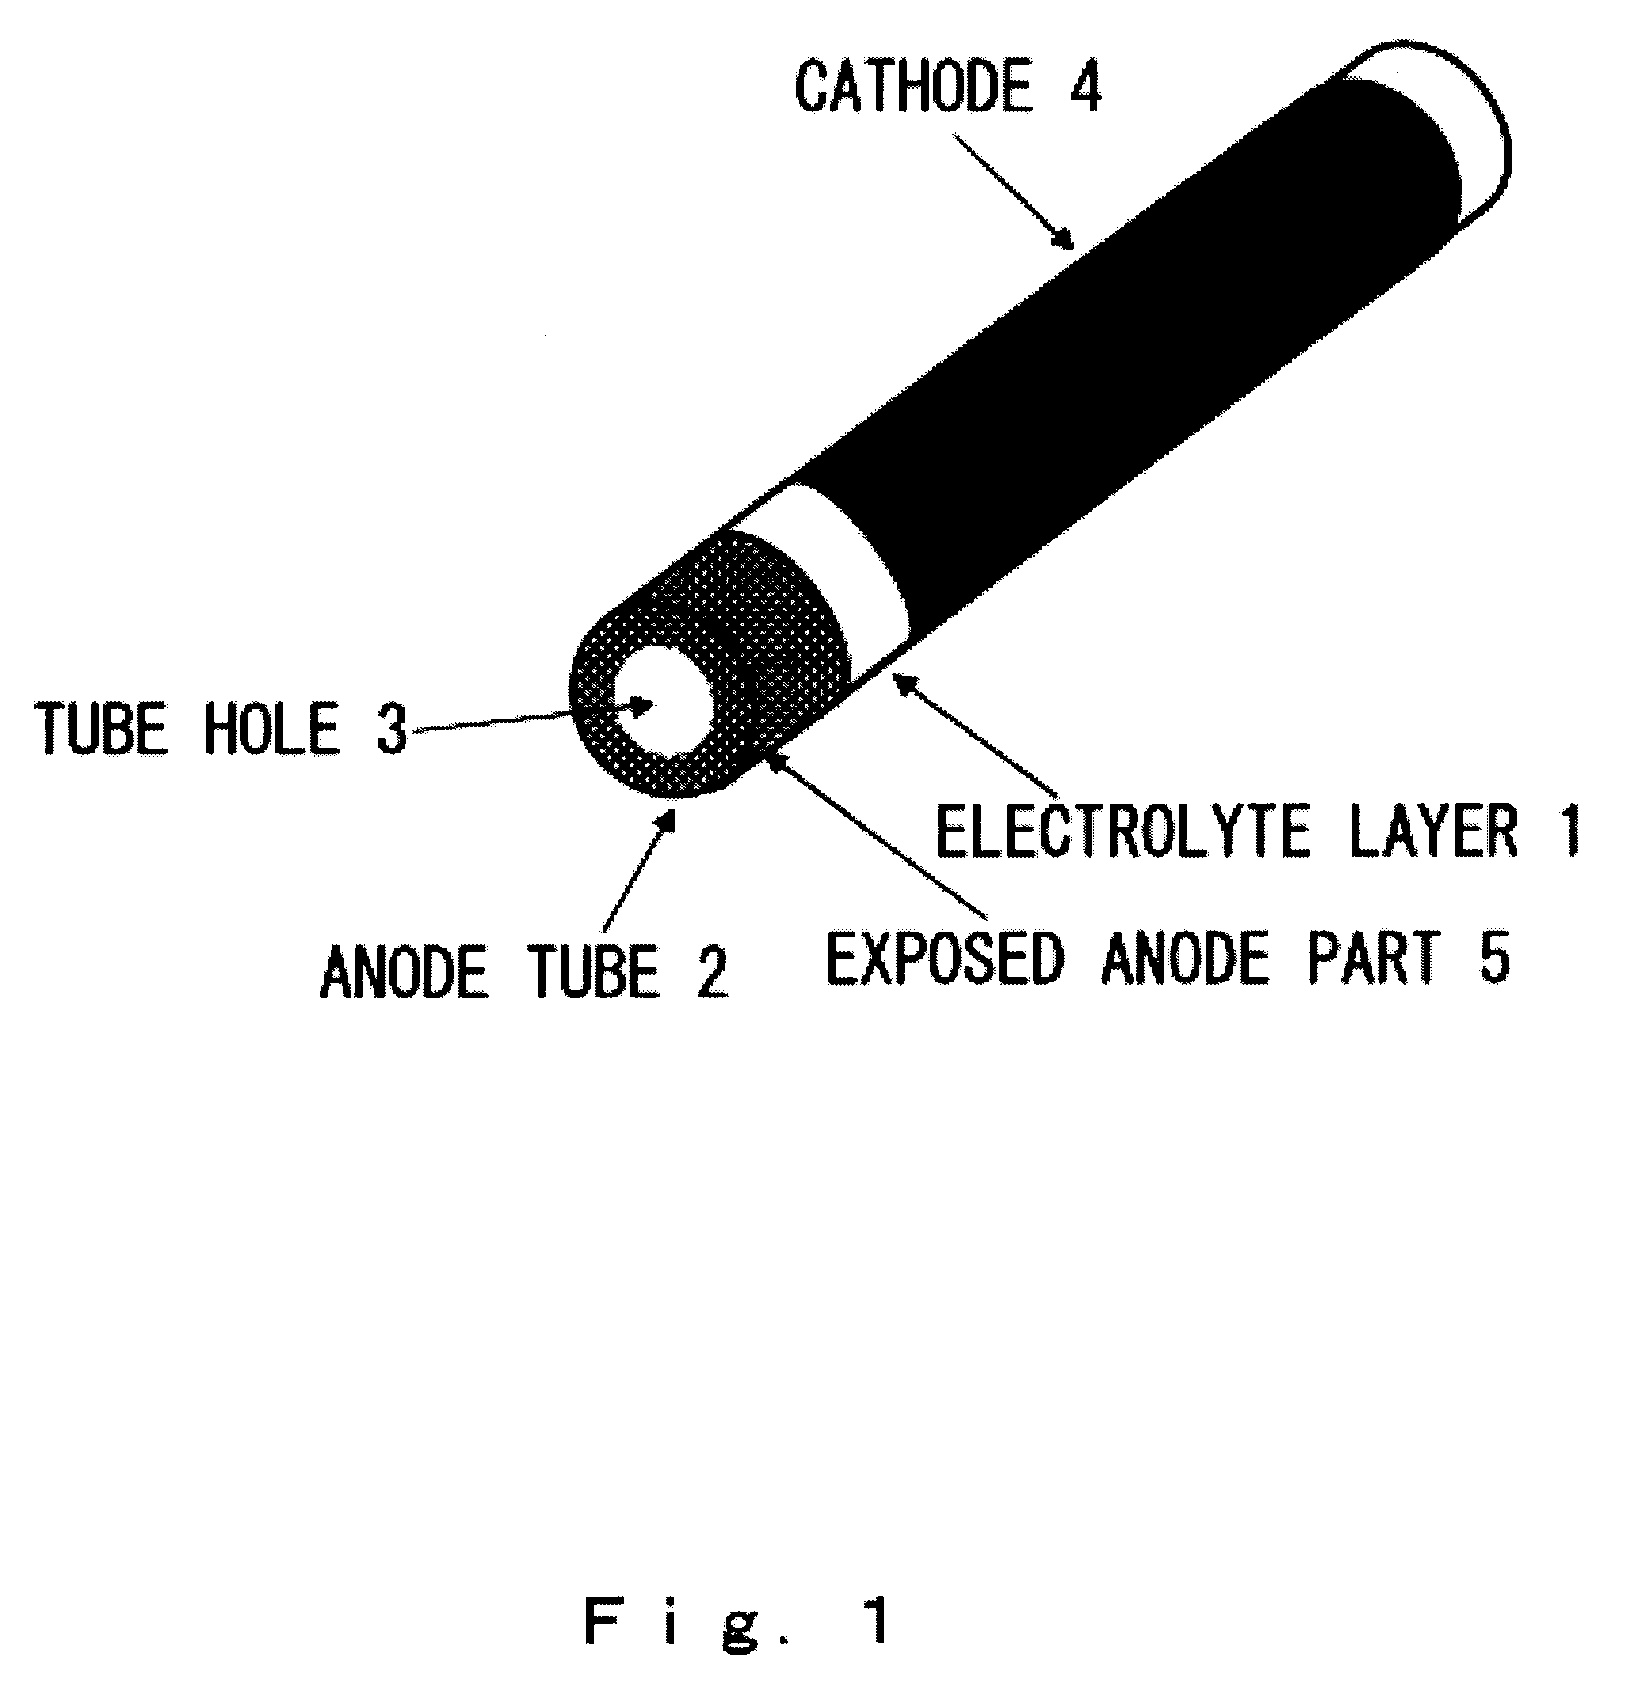 Manifold and stack of electrochemical reactor cells, and electrochemical reactor system composed of these components